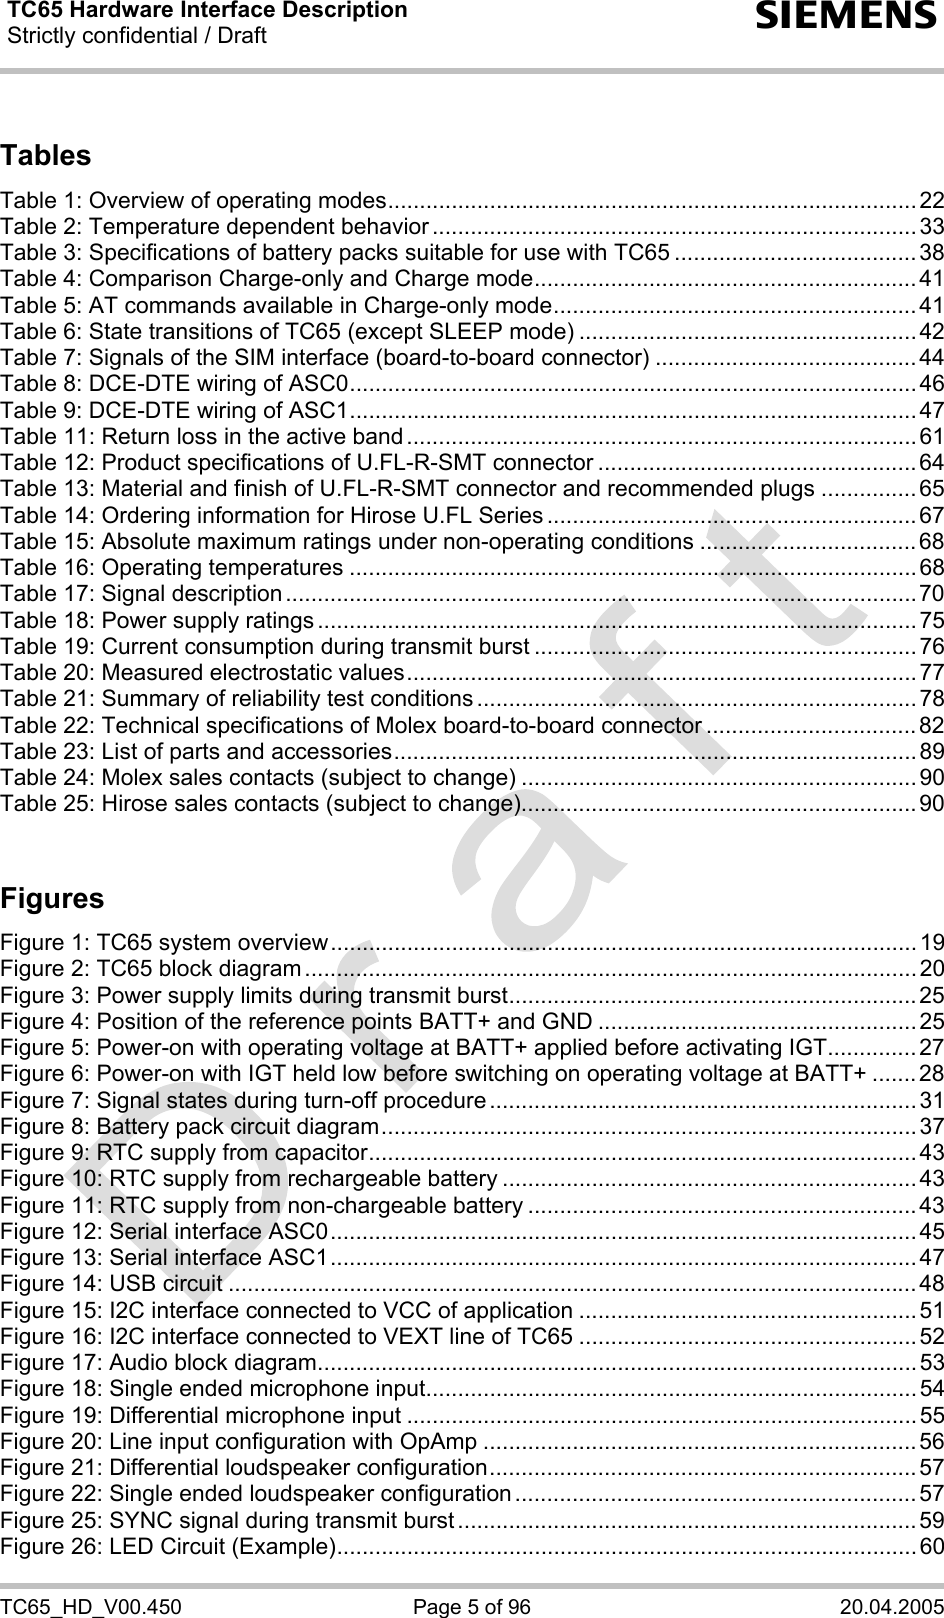 TC65 Hardware Interface Description Strictly confidential / Draft  s TC65_HD_V00.450  Page 5 of 96  20.04.2005 Tables  Table 1: Overview of operating modes................................................................................... 22 Table 2: Temperature dependent behavior ............................................................................ 33 Table 3: Specifications of battery packs suitable for use with TC65 ...................................... 38 Table 4: Comparison Charge-only and Charge mode............................................................ 41 Table 5: AT commands available in Charge-only mode......................................................... 41 Table 6: State transitions of TC65 (except SLEEP mode) .....................................................42 Table 7: Signals of the SIM interface (board-to-board connector) ......................................... 44 Table 8: DCE-DTE wiring of ASC0......................................................................................... 46 Table 9: DCE-DTE wiring of ASC1......................................................................................... 47 Table 11: Return loss in the active band ................................................................................61 Table 12: Product specifications of U.FL-R-SMT connector .................................................. 64 Table 13: Material and finish of U.FL-R-SMT connector and recommended plugs ...............65 Table 14: Ordering information for Hirose U.FL Series .......................................................... 67 Table 15: Absolute maximum ratings under non-operating conditions .................................. 68 Table 16: Operating temperatures ......................................................................................... 68 Table 17: Signal description...................................................................................................70 Table 18: Power supply ratings .............................................................................................. 75 Table 19: Current consumption during transmit burst ............................................................ 76 Table 20: Measured electrostatic values................................................................................77 Table 21: Summary of reliability test conditions ..................................................................... 78 Table 22: Technical specifications of Molex board-to-board connector .................................82 Table 23: List of parts and accessories..................................................................................89 Table 24: Molex sales contacts (subject to change) ..............................................................90 Table 25: Hirose sales contacts (subject to change)..............................................................90  Figures  Figure 1: TC65 system overview............................................................................................ 19 Figure 2: TC65 block diagram ................................................................................................20 Figure 3: Power supply limits during transmit burst................................................................ 25 Figure 4: Position of the reference points BATT+ and GND .................................................. 25 Figure 5: Power-on with operating voltage at BATT+ applied before activating IGT.............. 27 Figure 6: Power-on with IGT held low before switching on operating voltage at BATT+ .......28 Figure 7: Signal states during turn-off procedure ...................................................................31 Figure 8: Battery pack circuit diagram....................................................................................37 Figure 9: RTC supply from capacitor...................................................................................... 43 Figure 10: RTC supply from rechargeable battery .................................................................43 Figure 11: RTC supply from non-chargeable battery .............................................................43 Figure 12: Serial interface ASC0............................................................................................ 45 Figure 13: Serial interface ASC1............................................................................................ 47 Figure 14: USB circuit ............................................................................................................48 Figure 15: I2C interface connected to VCC of application .....................................................51 Figure 16: I2C interface connected to VEXT line of TC65 ..................................................... 52 Figure 17: Audio block diagram.............................................................................................. 53 Figure 18: Single ended microphone input............................................................................. 54 Figure 19: Differential microphone input ................................................................................55 Figure 20: Line input configuration with OpAmp .................................................................... 56 Figure 21: Differential loudspeaker configuration...................................................................57 Figure 22: Single ended loudspeaker configuration............................................................... 57 Figure 25: SYNC signal during transmit burst ........................................................................ 59 Figure 26: LED Circuit (Example)...........................................................................................60 